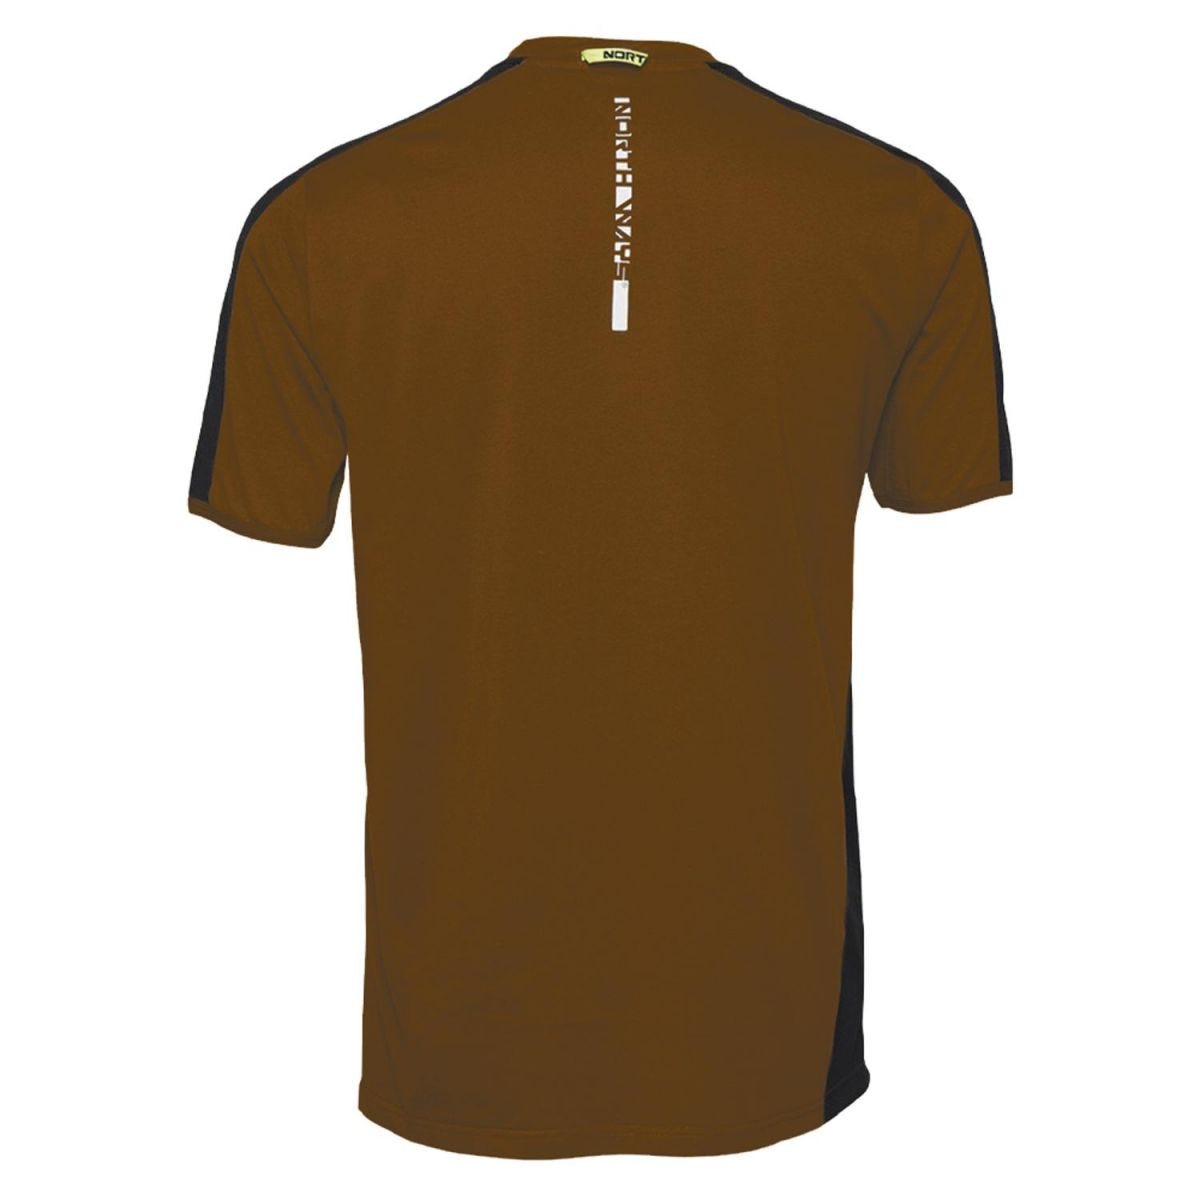 Tee-shirt à manches courtes pour homme Andy camel - North Ways - Taille XL 1